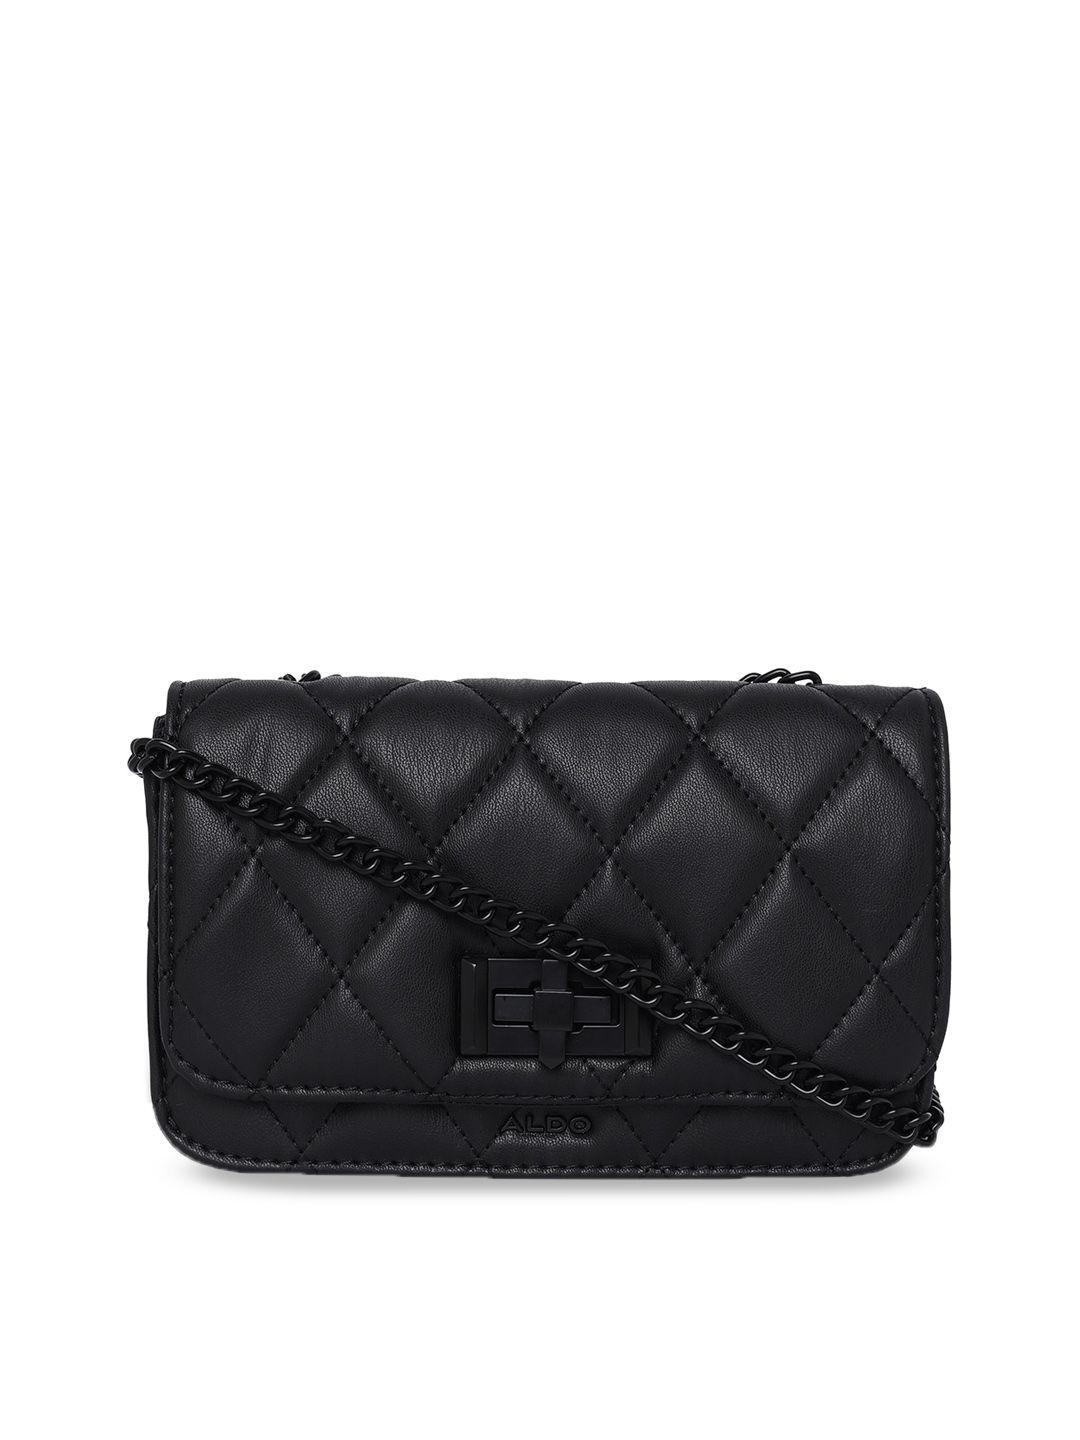 aldo structured sling bag with quilted